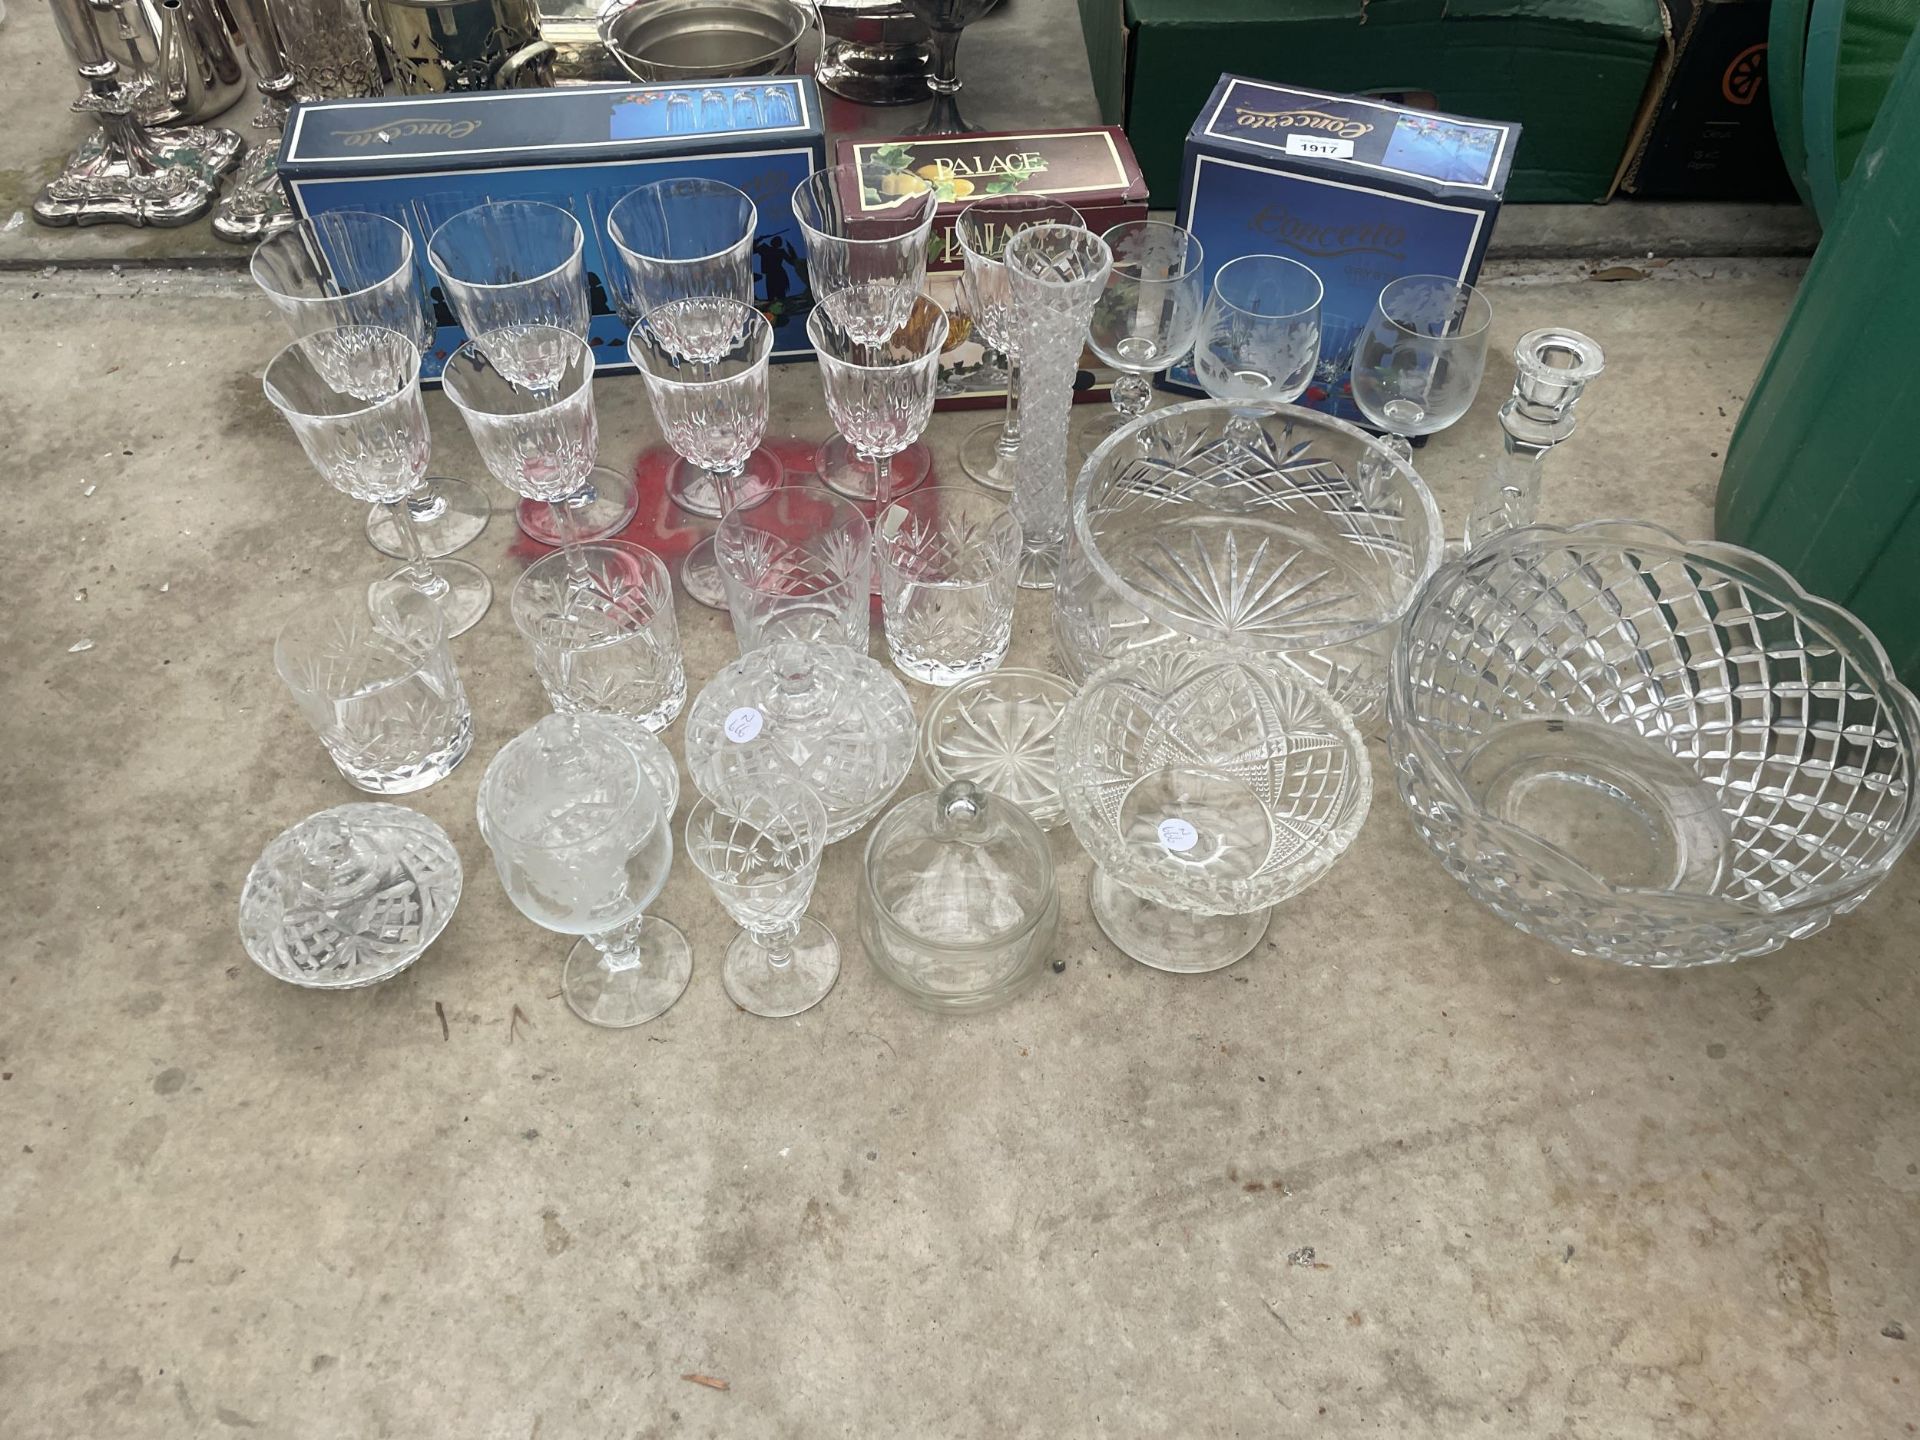 AN ASSORTMENT OF GLASS WARE TO INCLUDE CUT GLASS WINE GLASSES, BOWLS AND TRINKET DISHES ETC